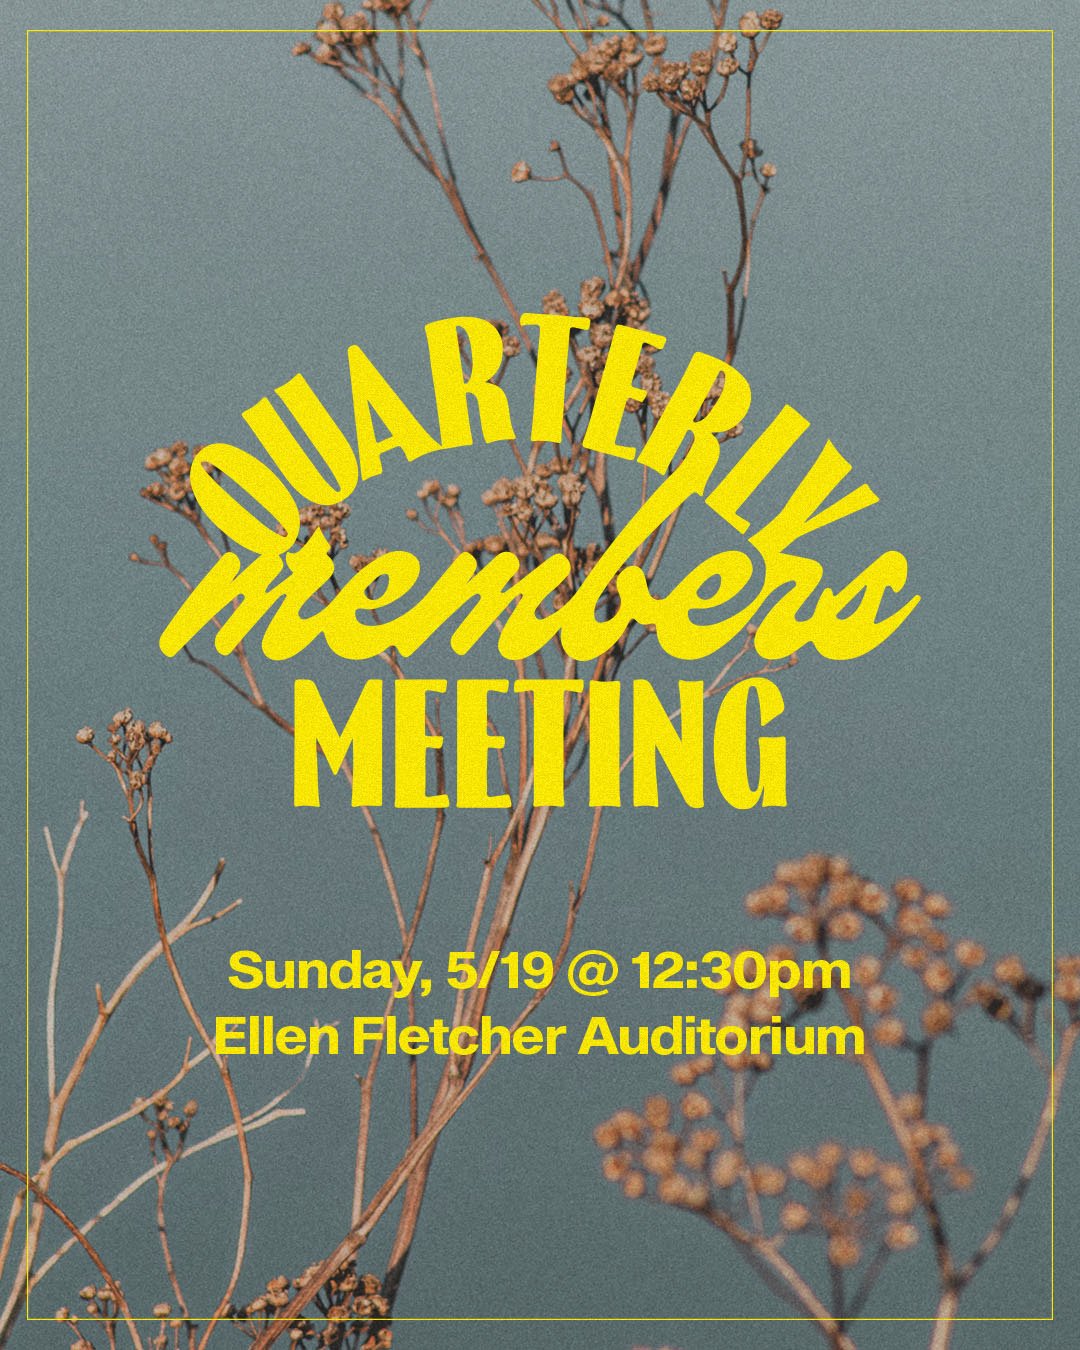 Hello church, announcements below!

- Mark your calendars for our quarterly members meeting on Sunday, May 19th at 12:30 PM in the Ellen Fletcher auditorium. Non-members are also welcome to attend!

- Join our Men's Ministry on May 18th for a worksho